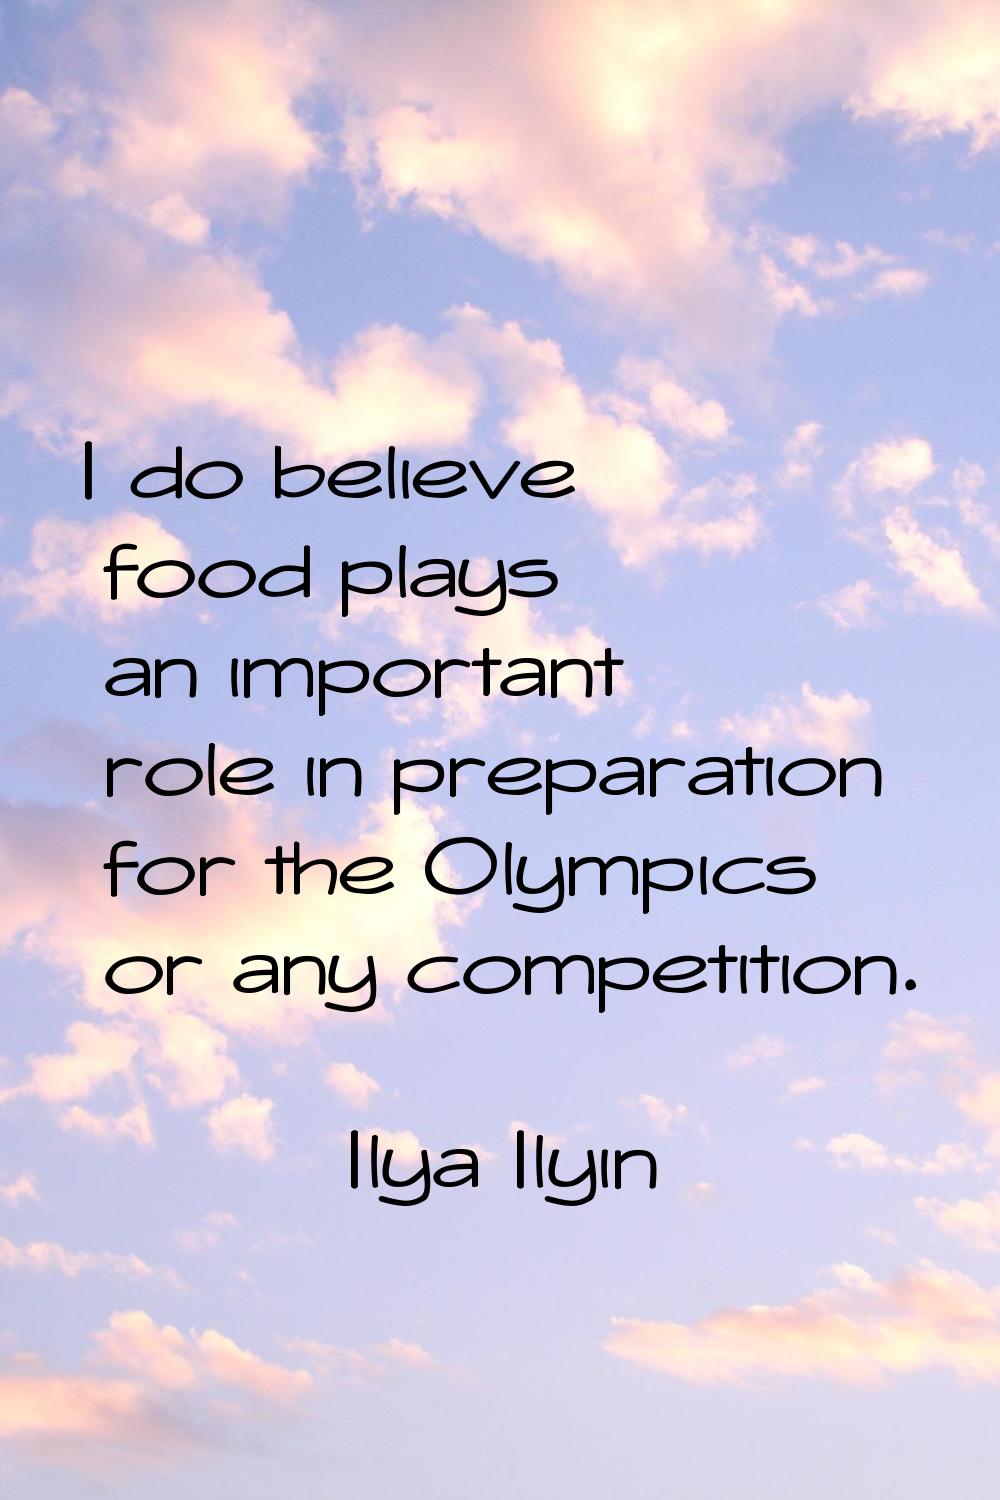 I do believe food plays an important role in preparation for the Olympics or any competition.